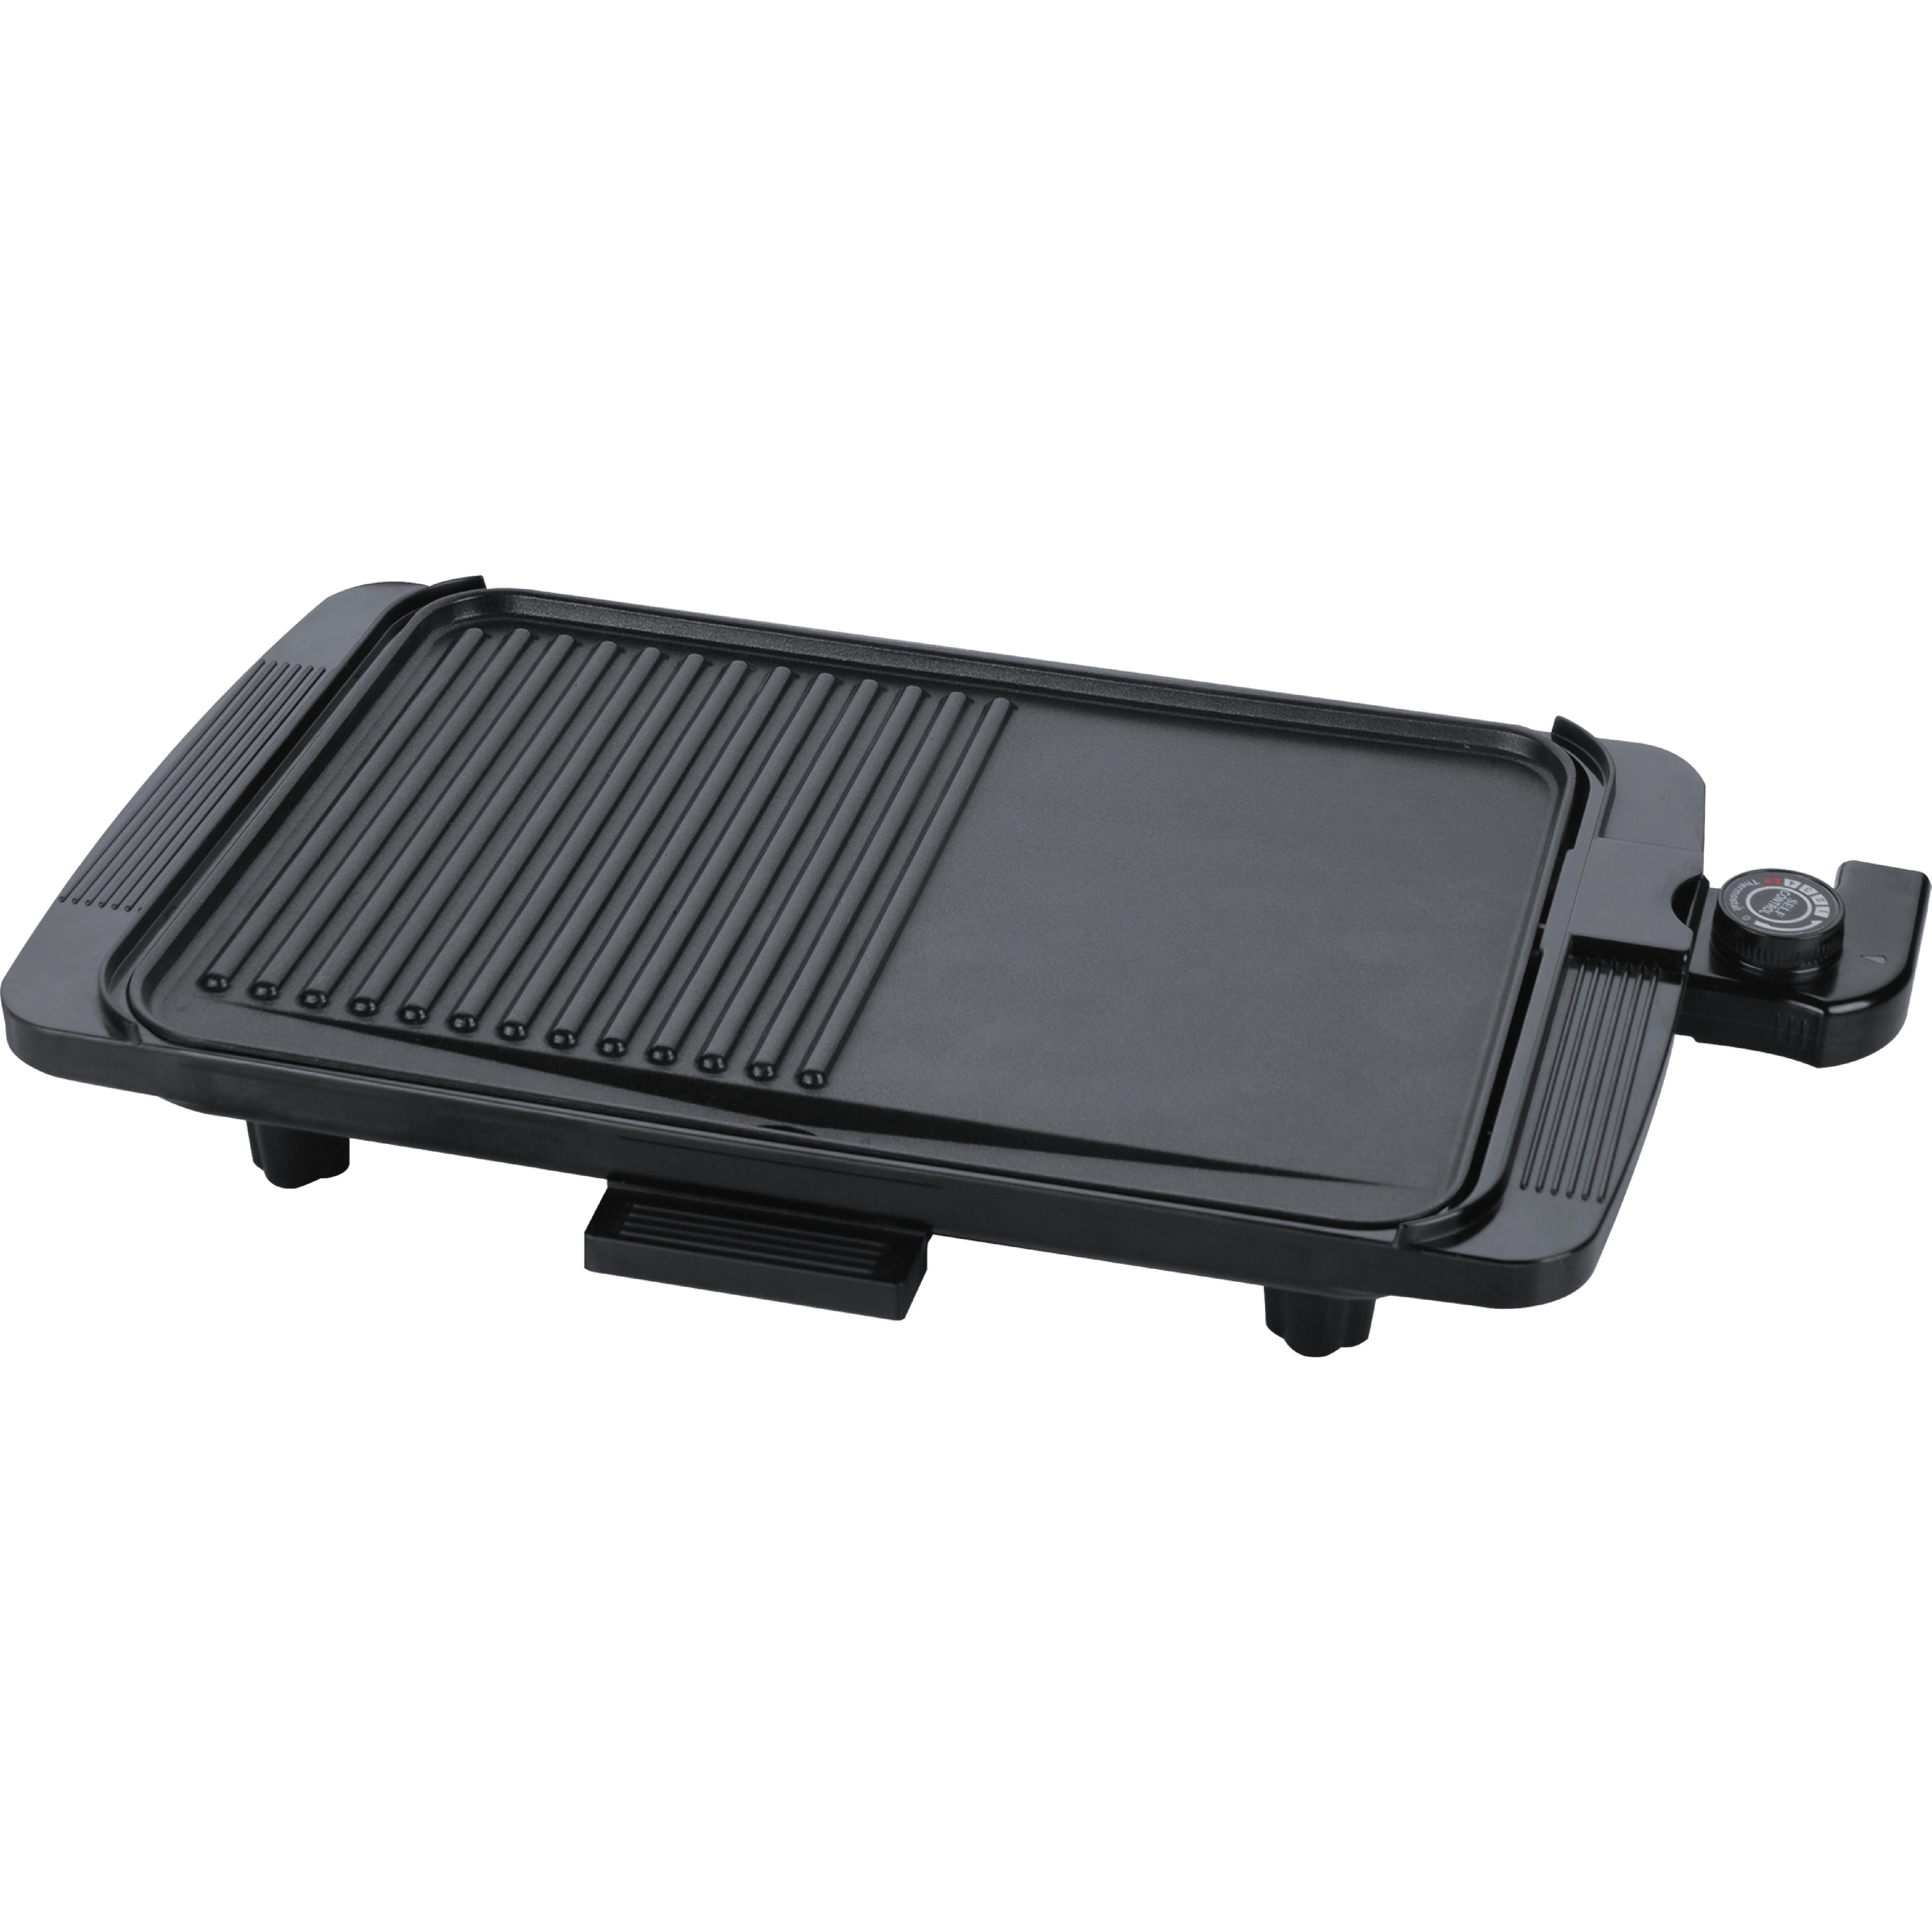 CG-202 Electric Grill